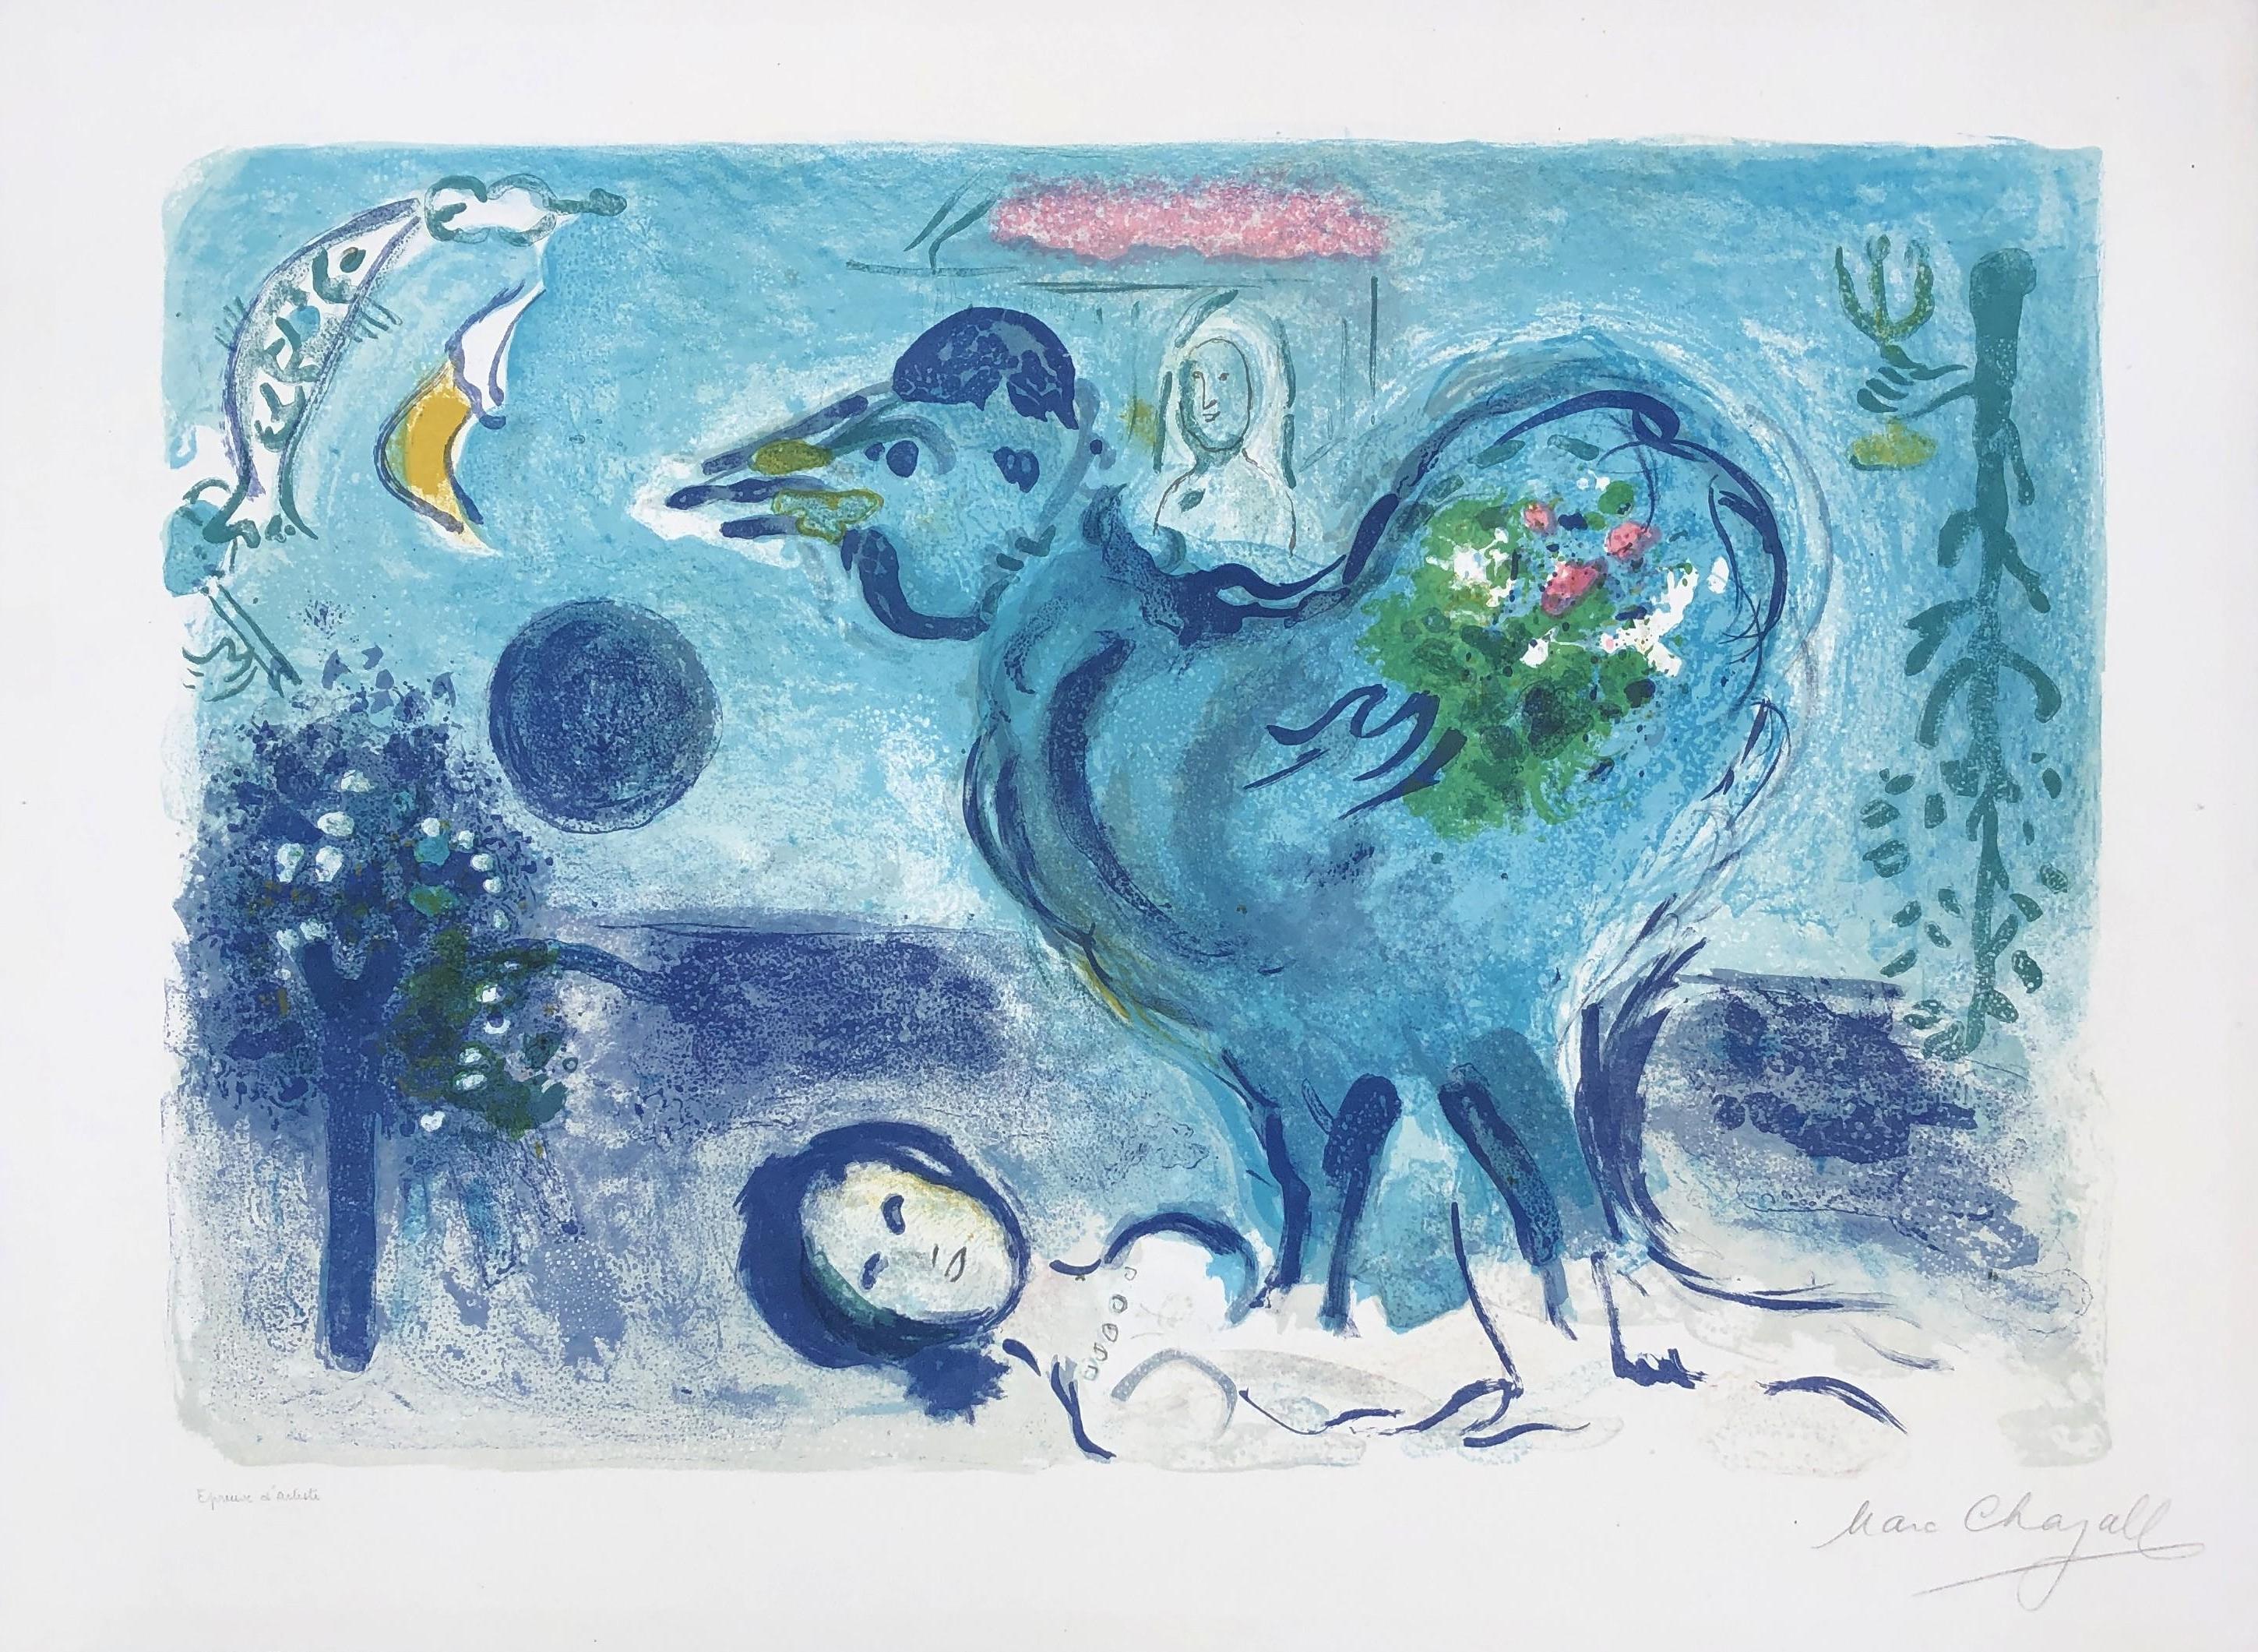 Marc Chagall Figurative Print - Landscape With Rooster - Original Lithograph Handsigned (Mourlot #208)